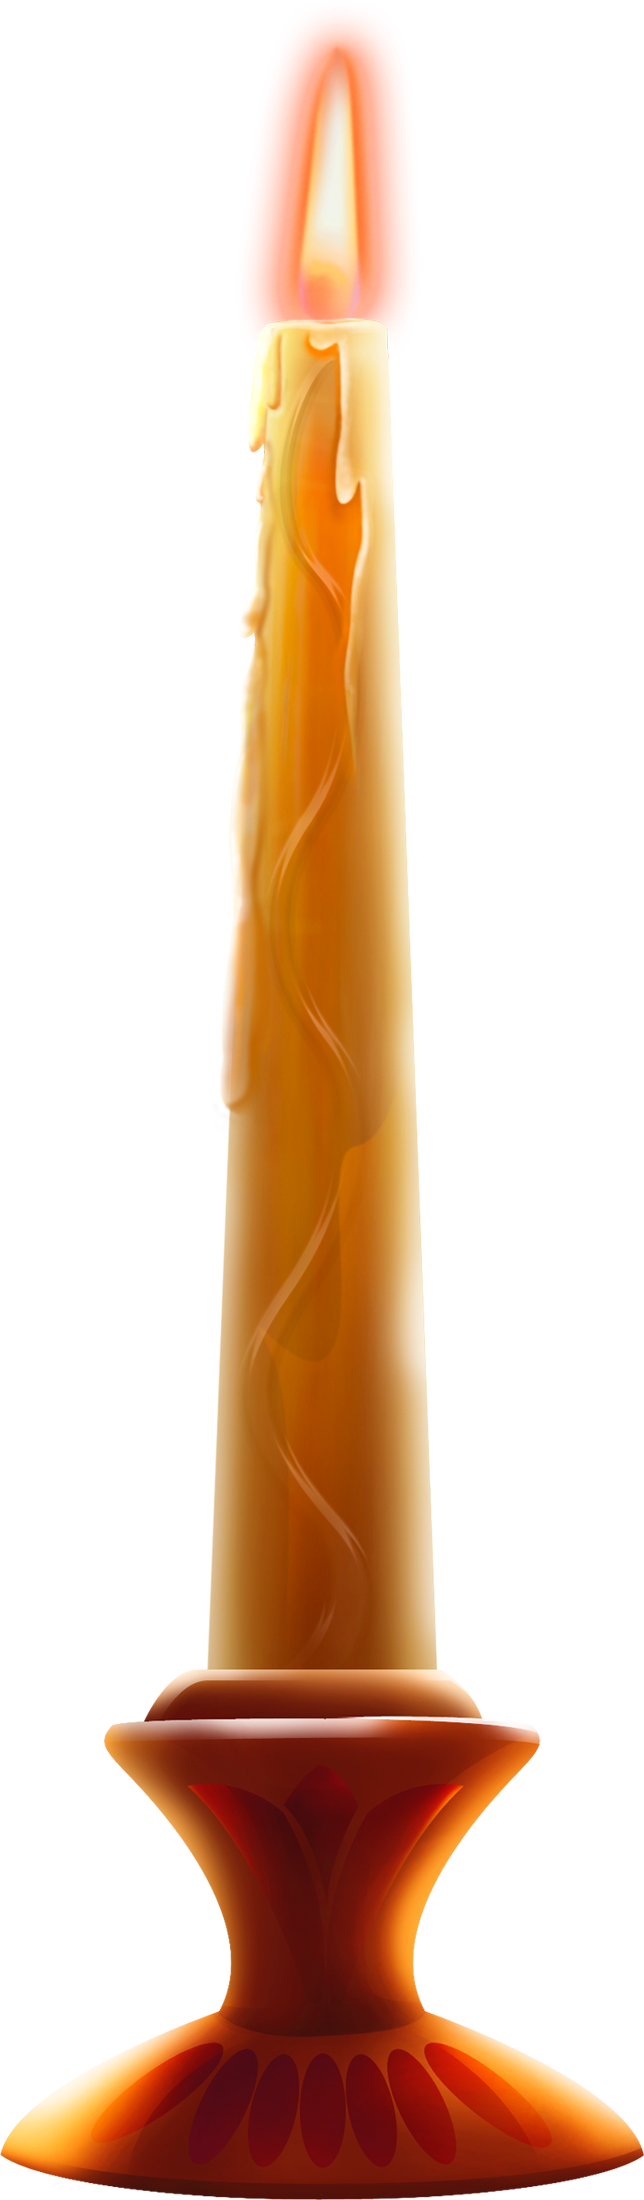 Candle PNG - 1602